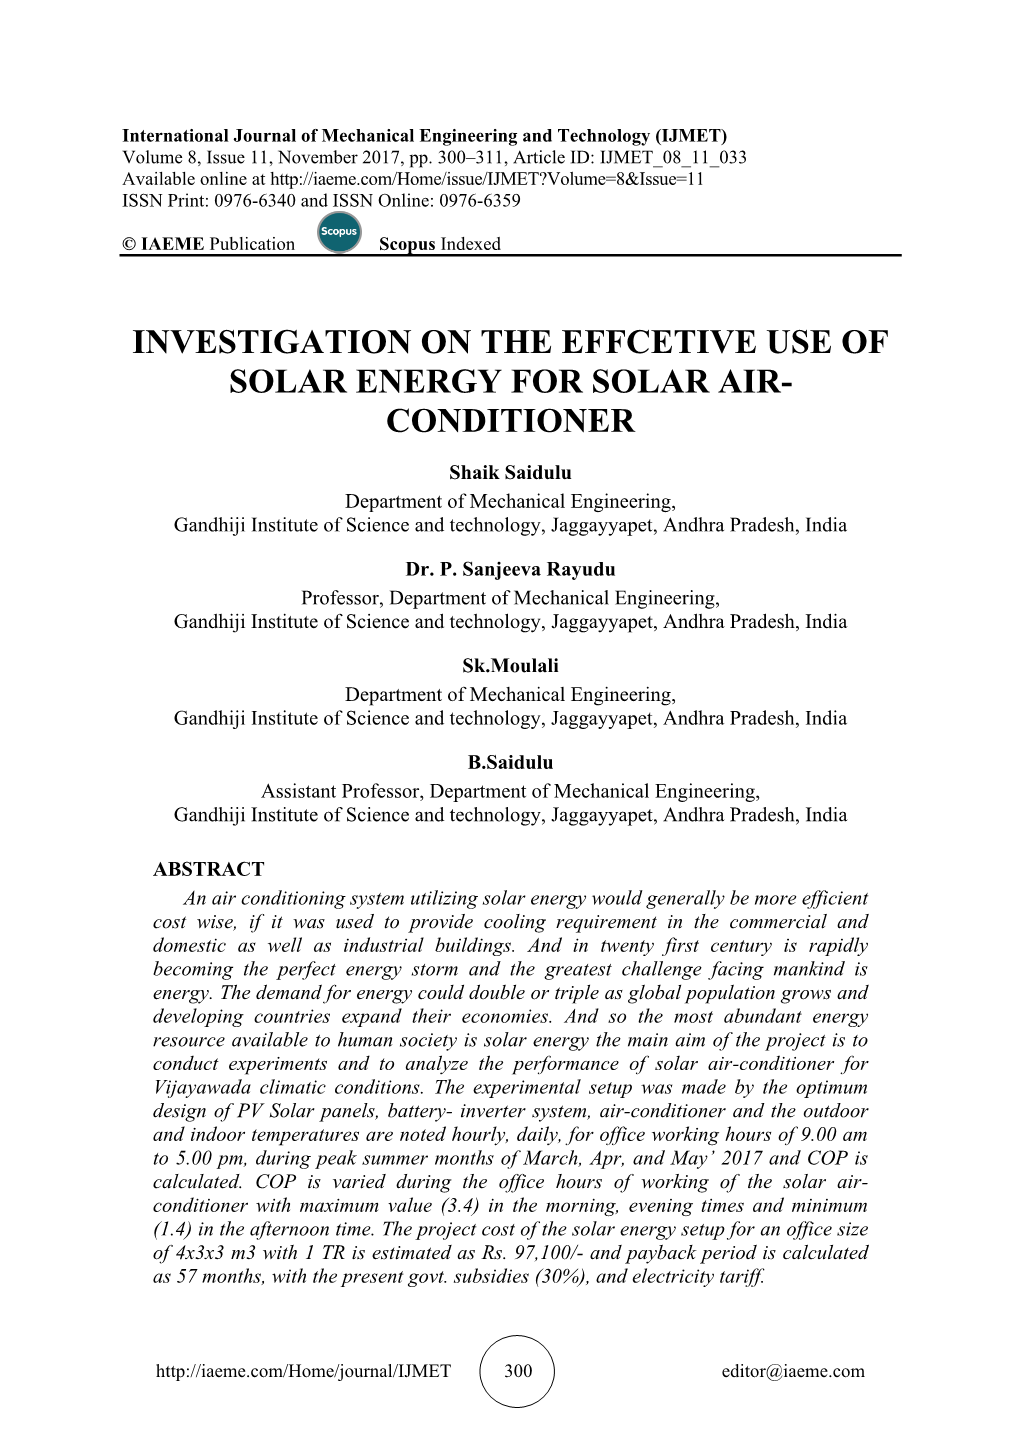 Investigation on the Effcetive Use of Solar Energy for Solar Air- Conditioner